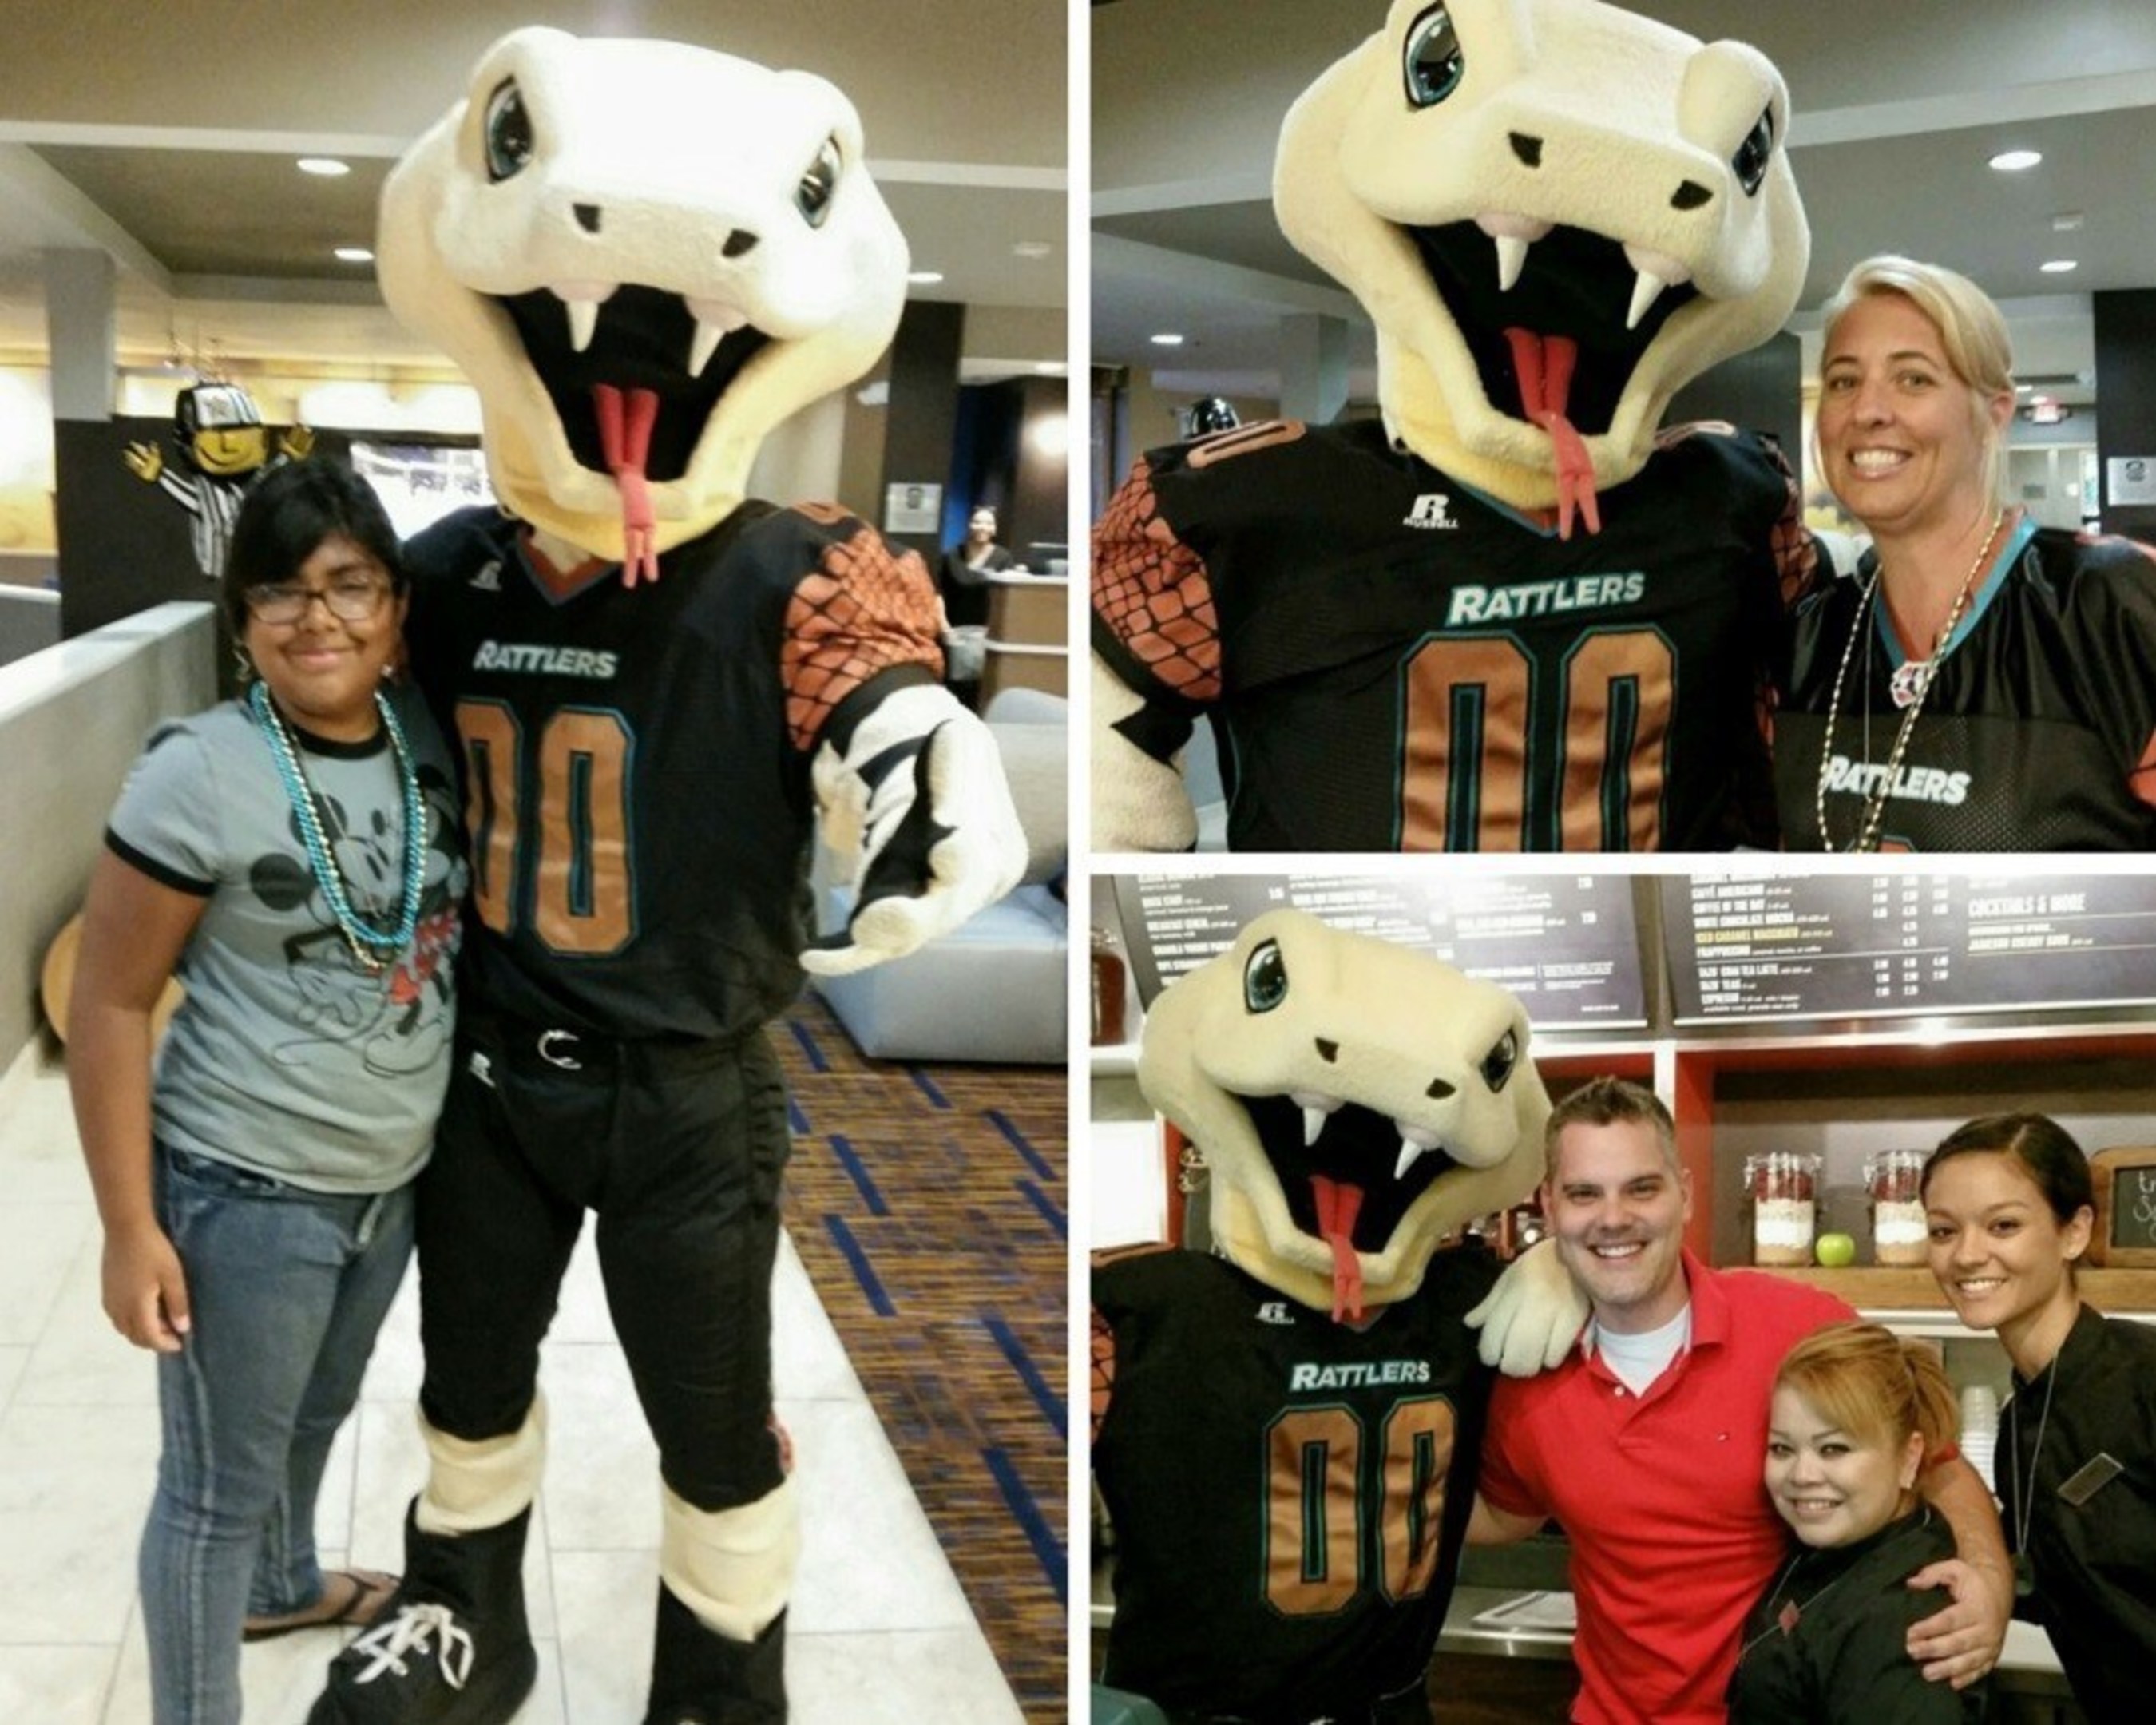 Courtyard Phoenix North entices Arizona Rattlers fans with an exciting watch party during the July 31, 2015 away game. The 7:30 p.m. gathering is complete with seven TVs, free popcorn, free Rattlers necklaces and a special appearance from the beloved mascot, Stryker. For information, visit www.marriott.com/PHXMC or call 1-602-944-7373.